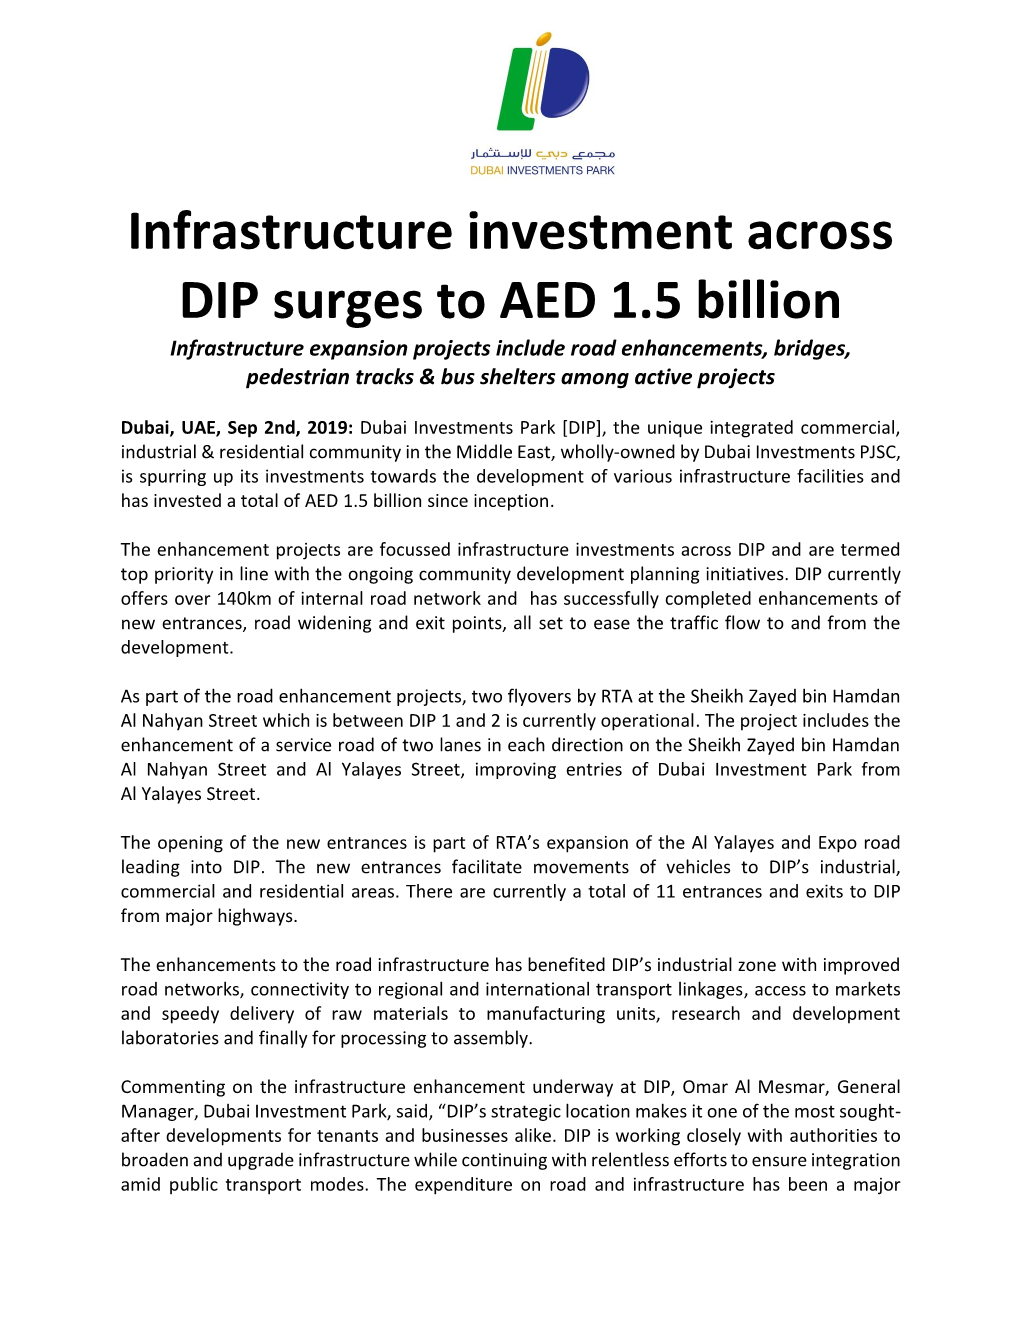 Infrastructure Investment Across DIP Surges to AED 1.5 Billion